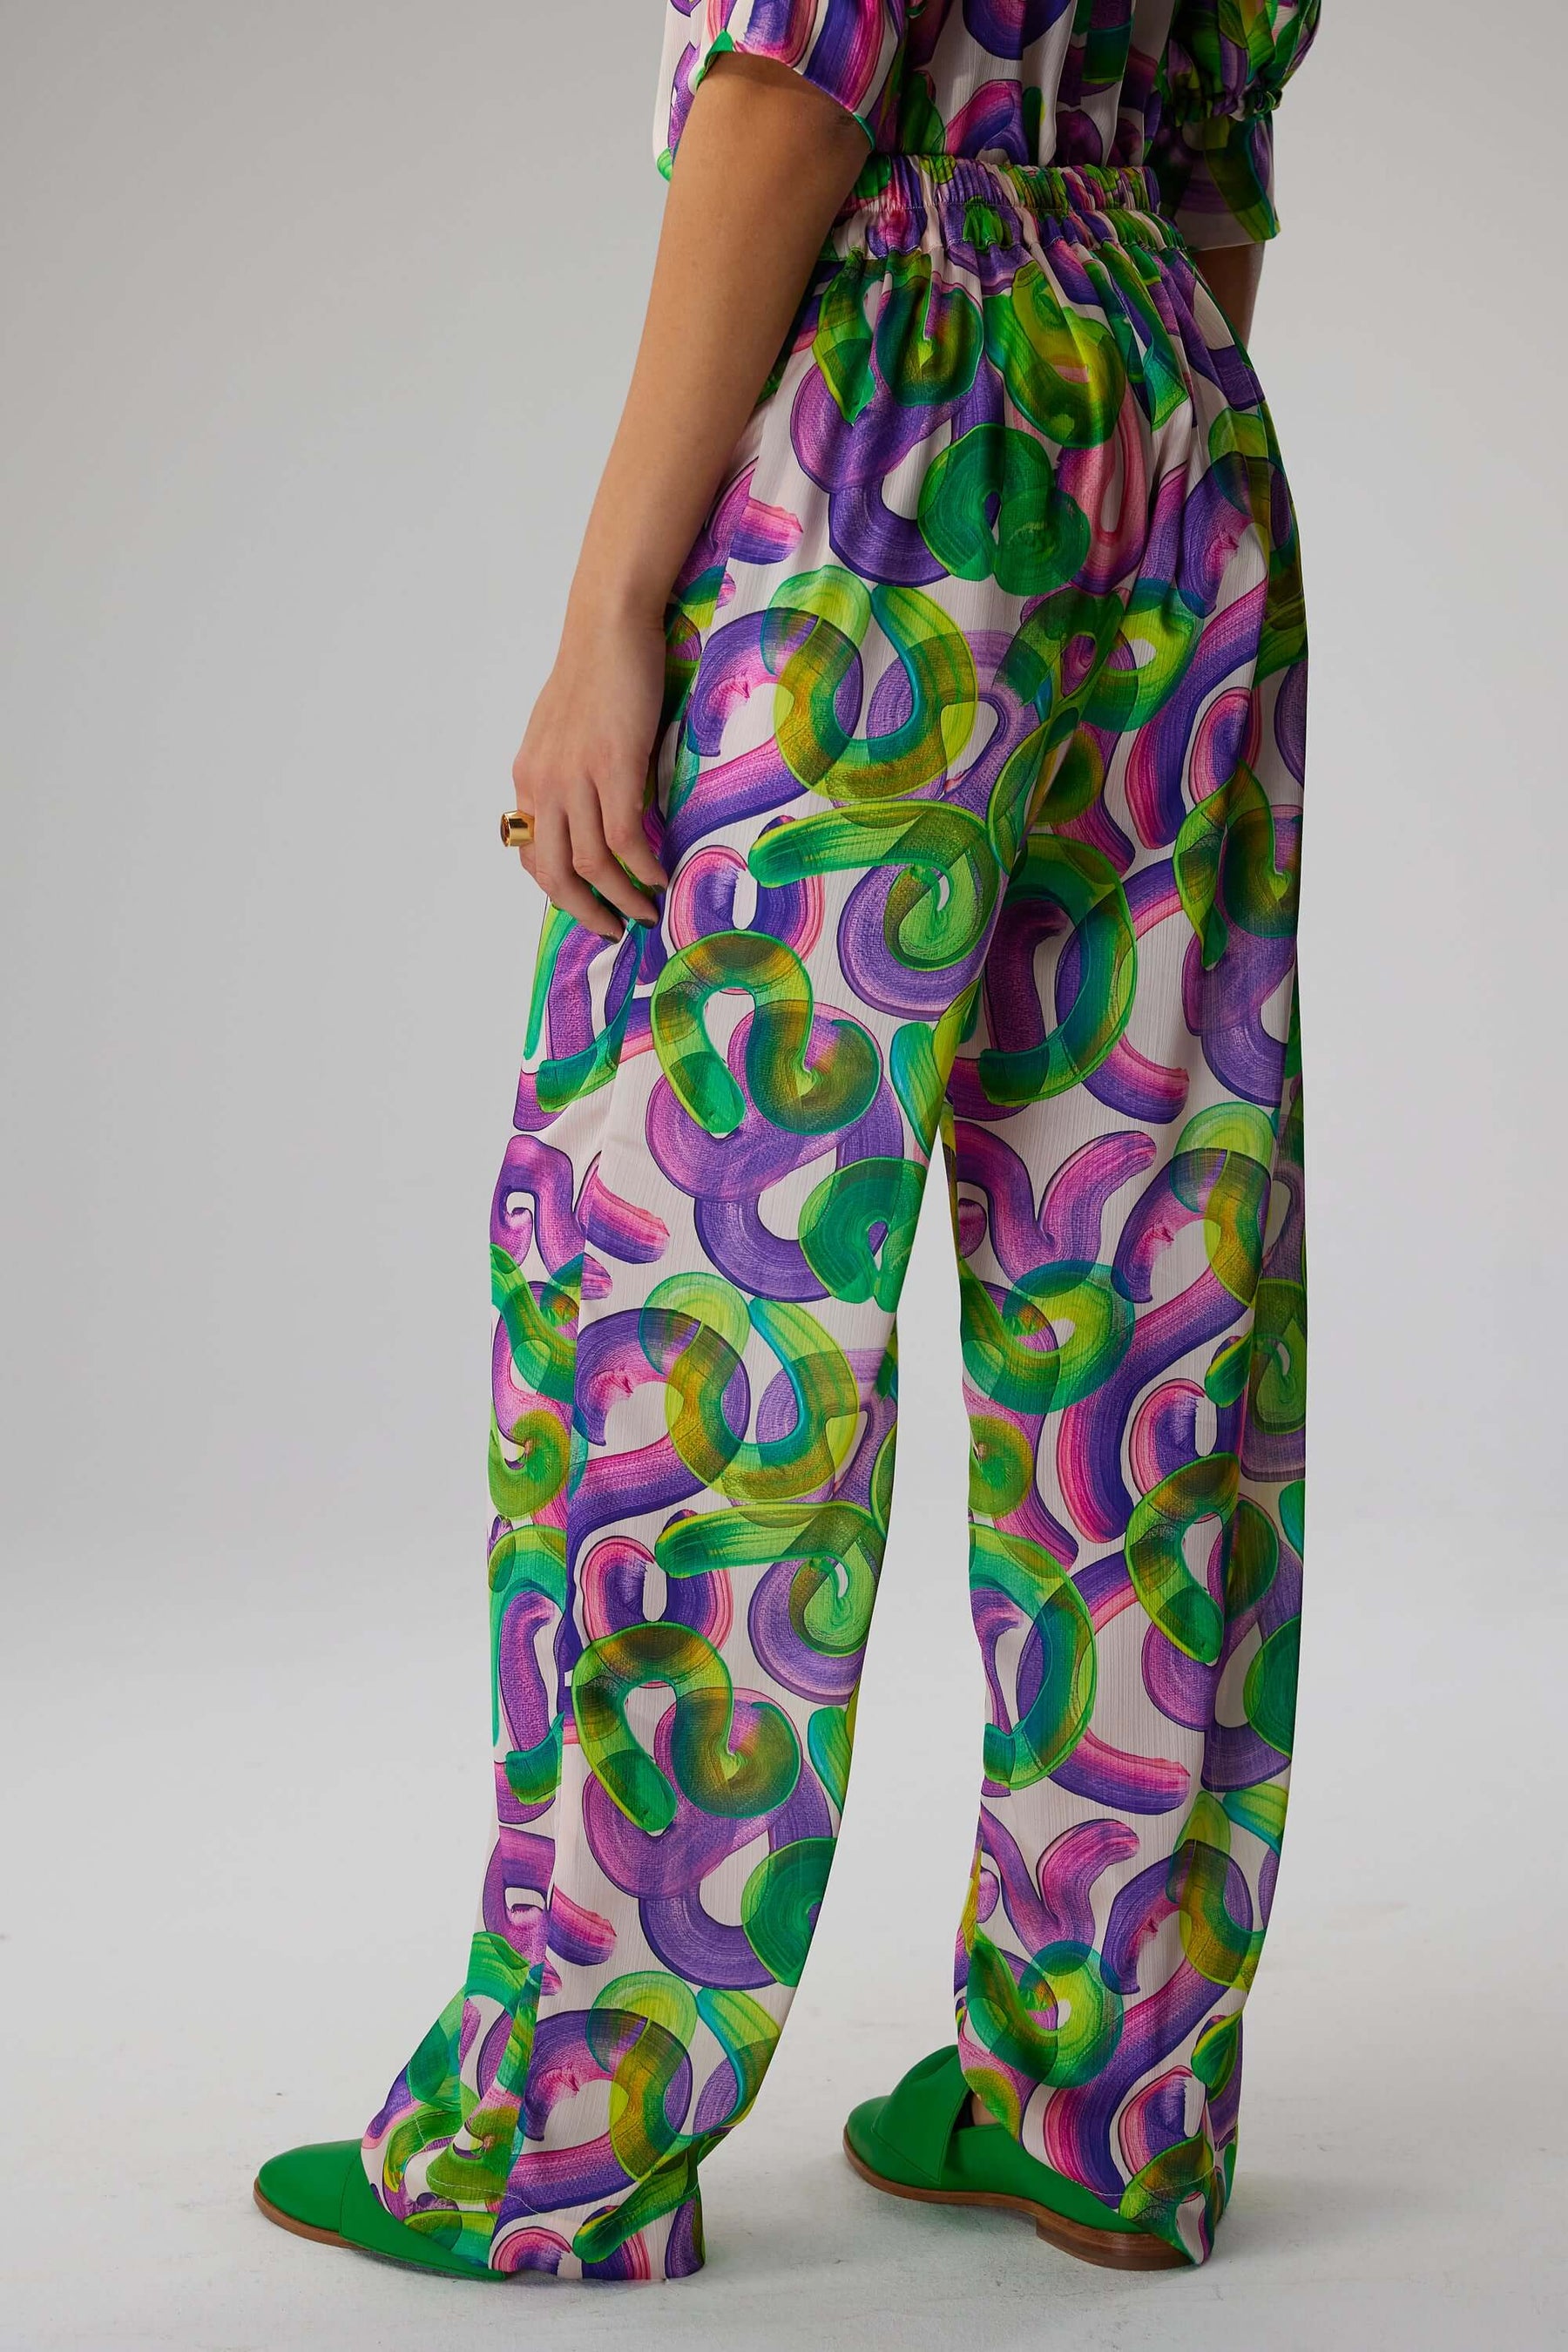 Spartacus pants in Iodine Marshmallow print